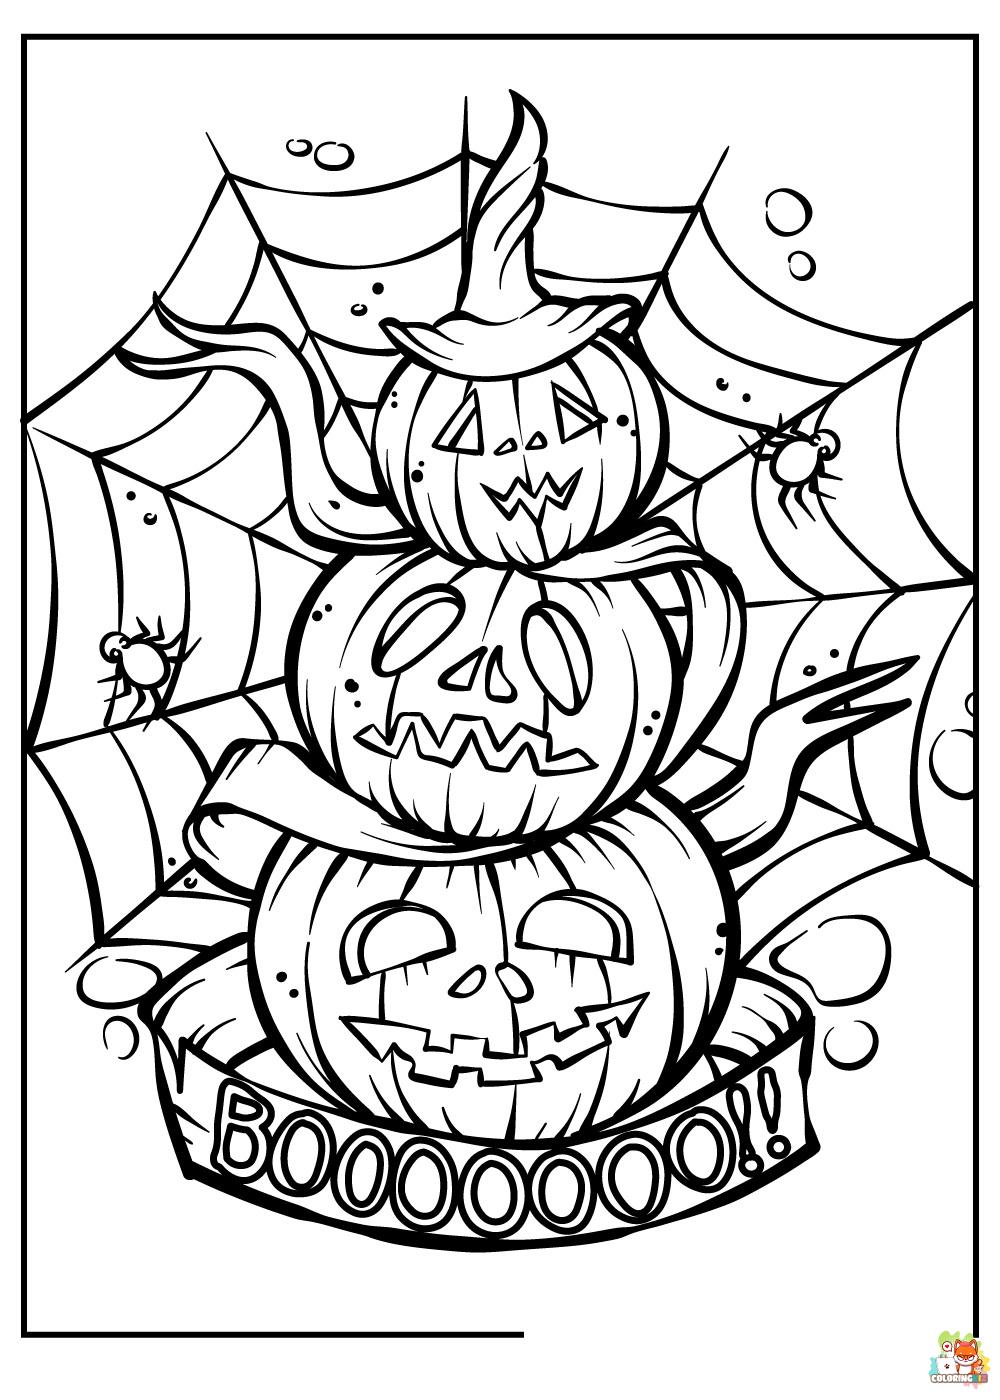 Halloween Coloring Pages 3